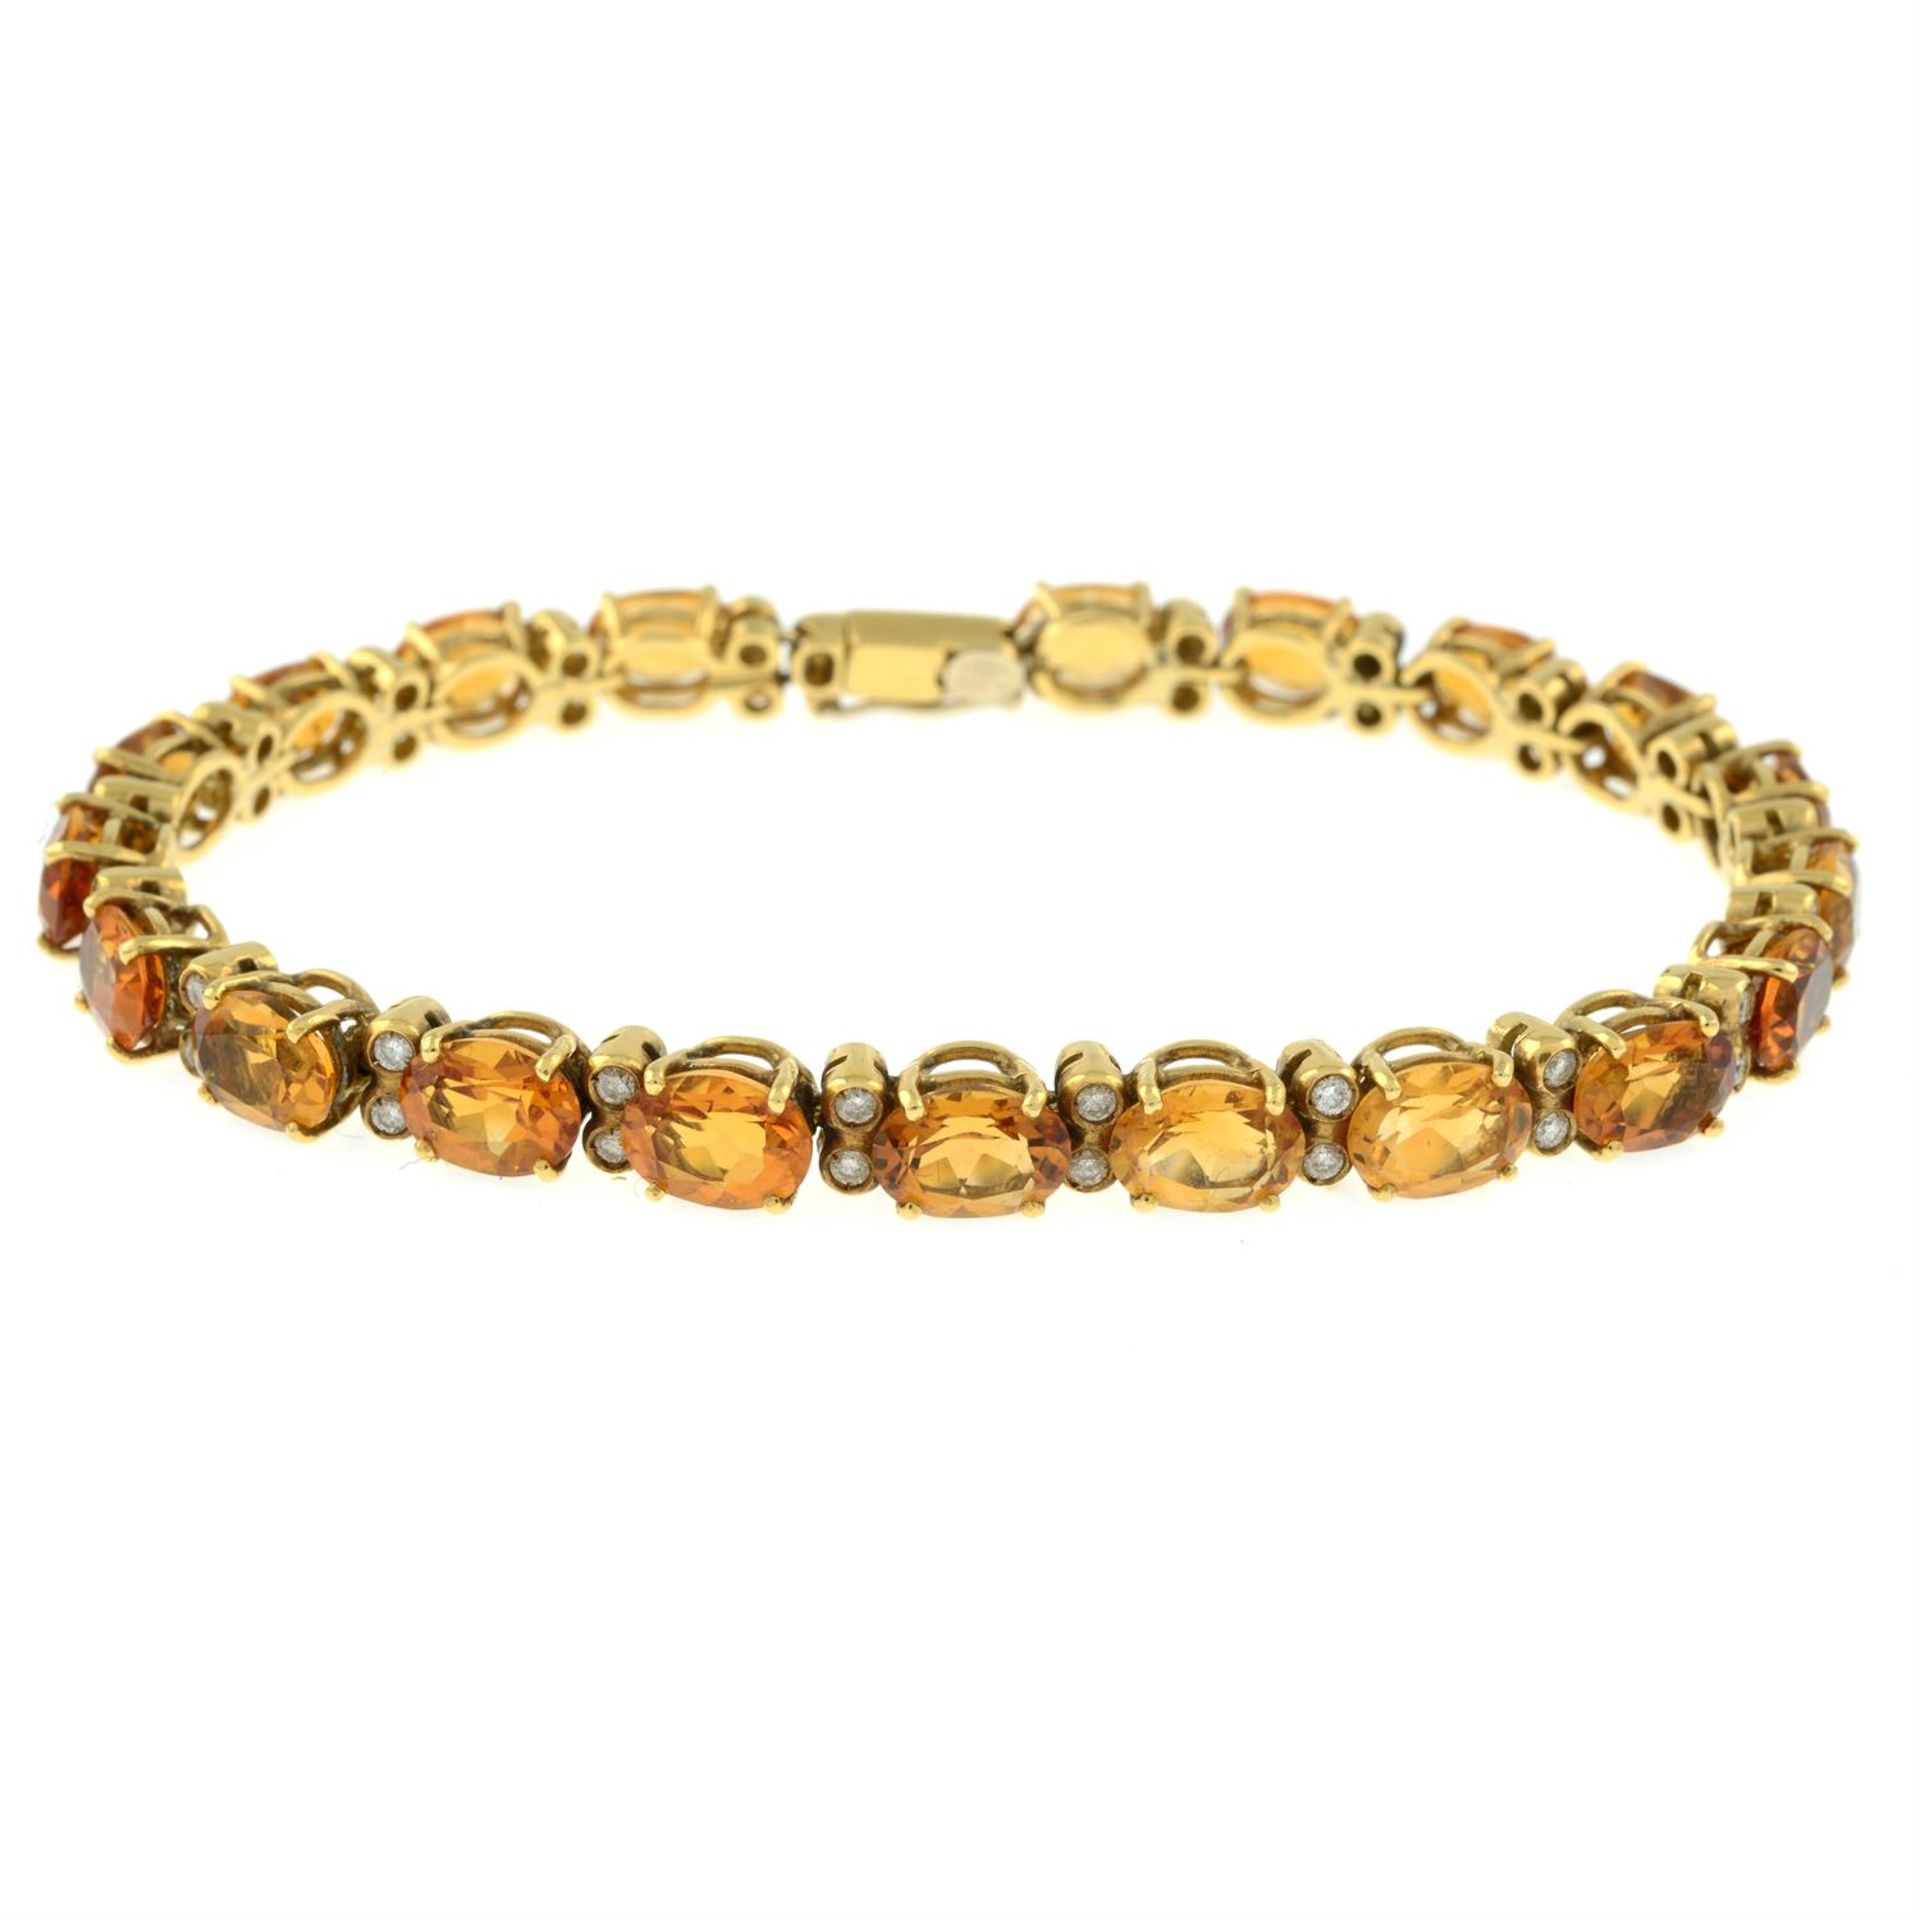 A citrine bracelet, with brilliant-cut diamond spacers. - Image 2 of 3